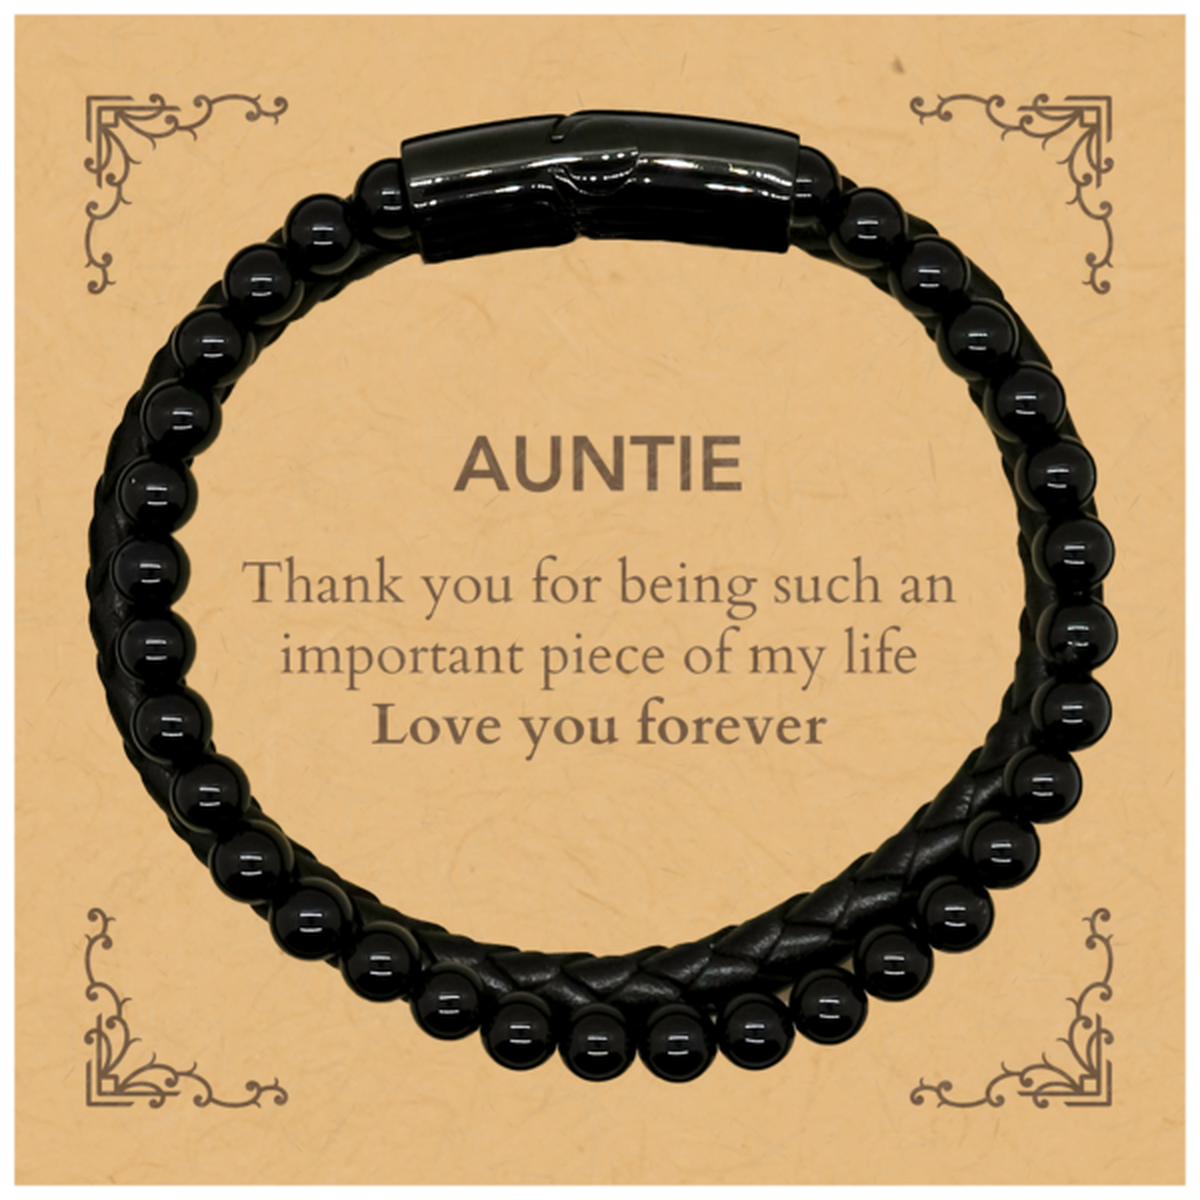 Appropriate Auntie Stone Leather Bracelets Epic Birthday Gifts for Auntie Thank you for being such an important piece of my life Auntie Christmas Mothers Fathers Day